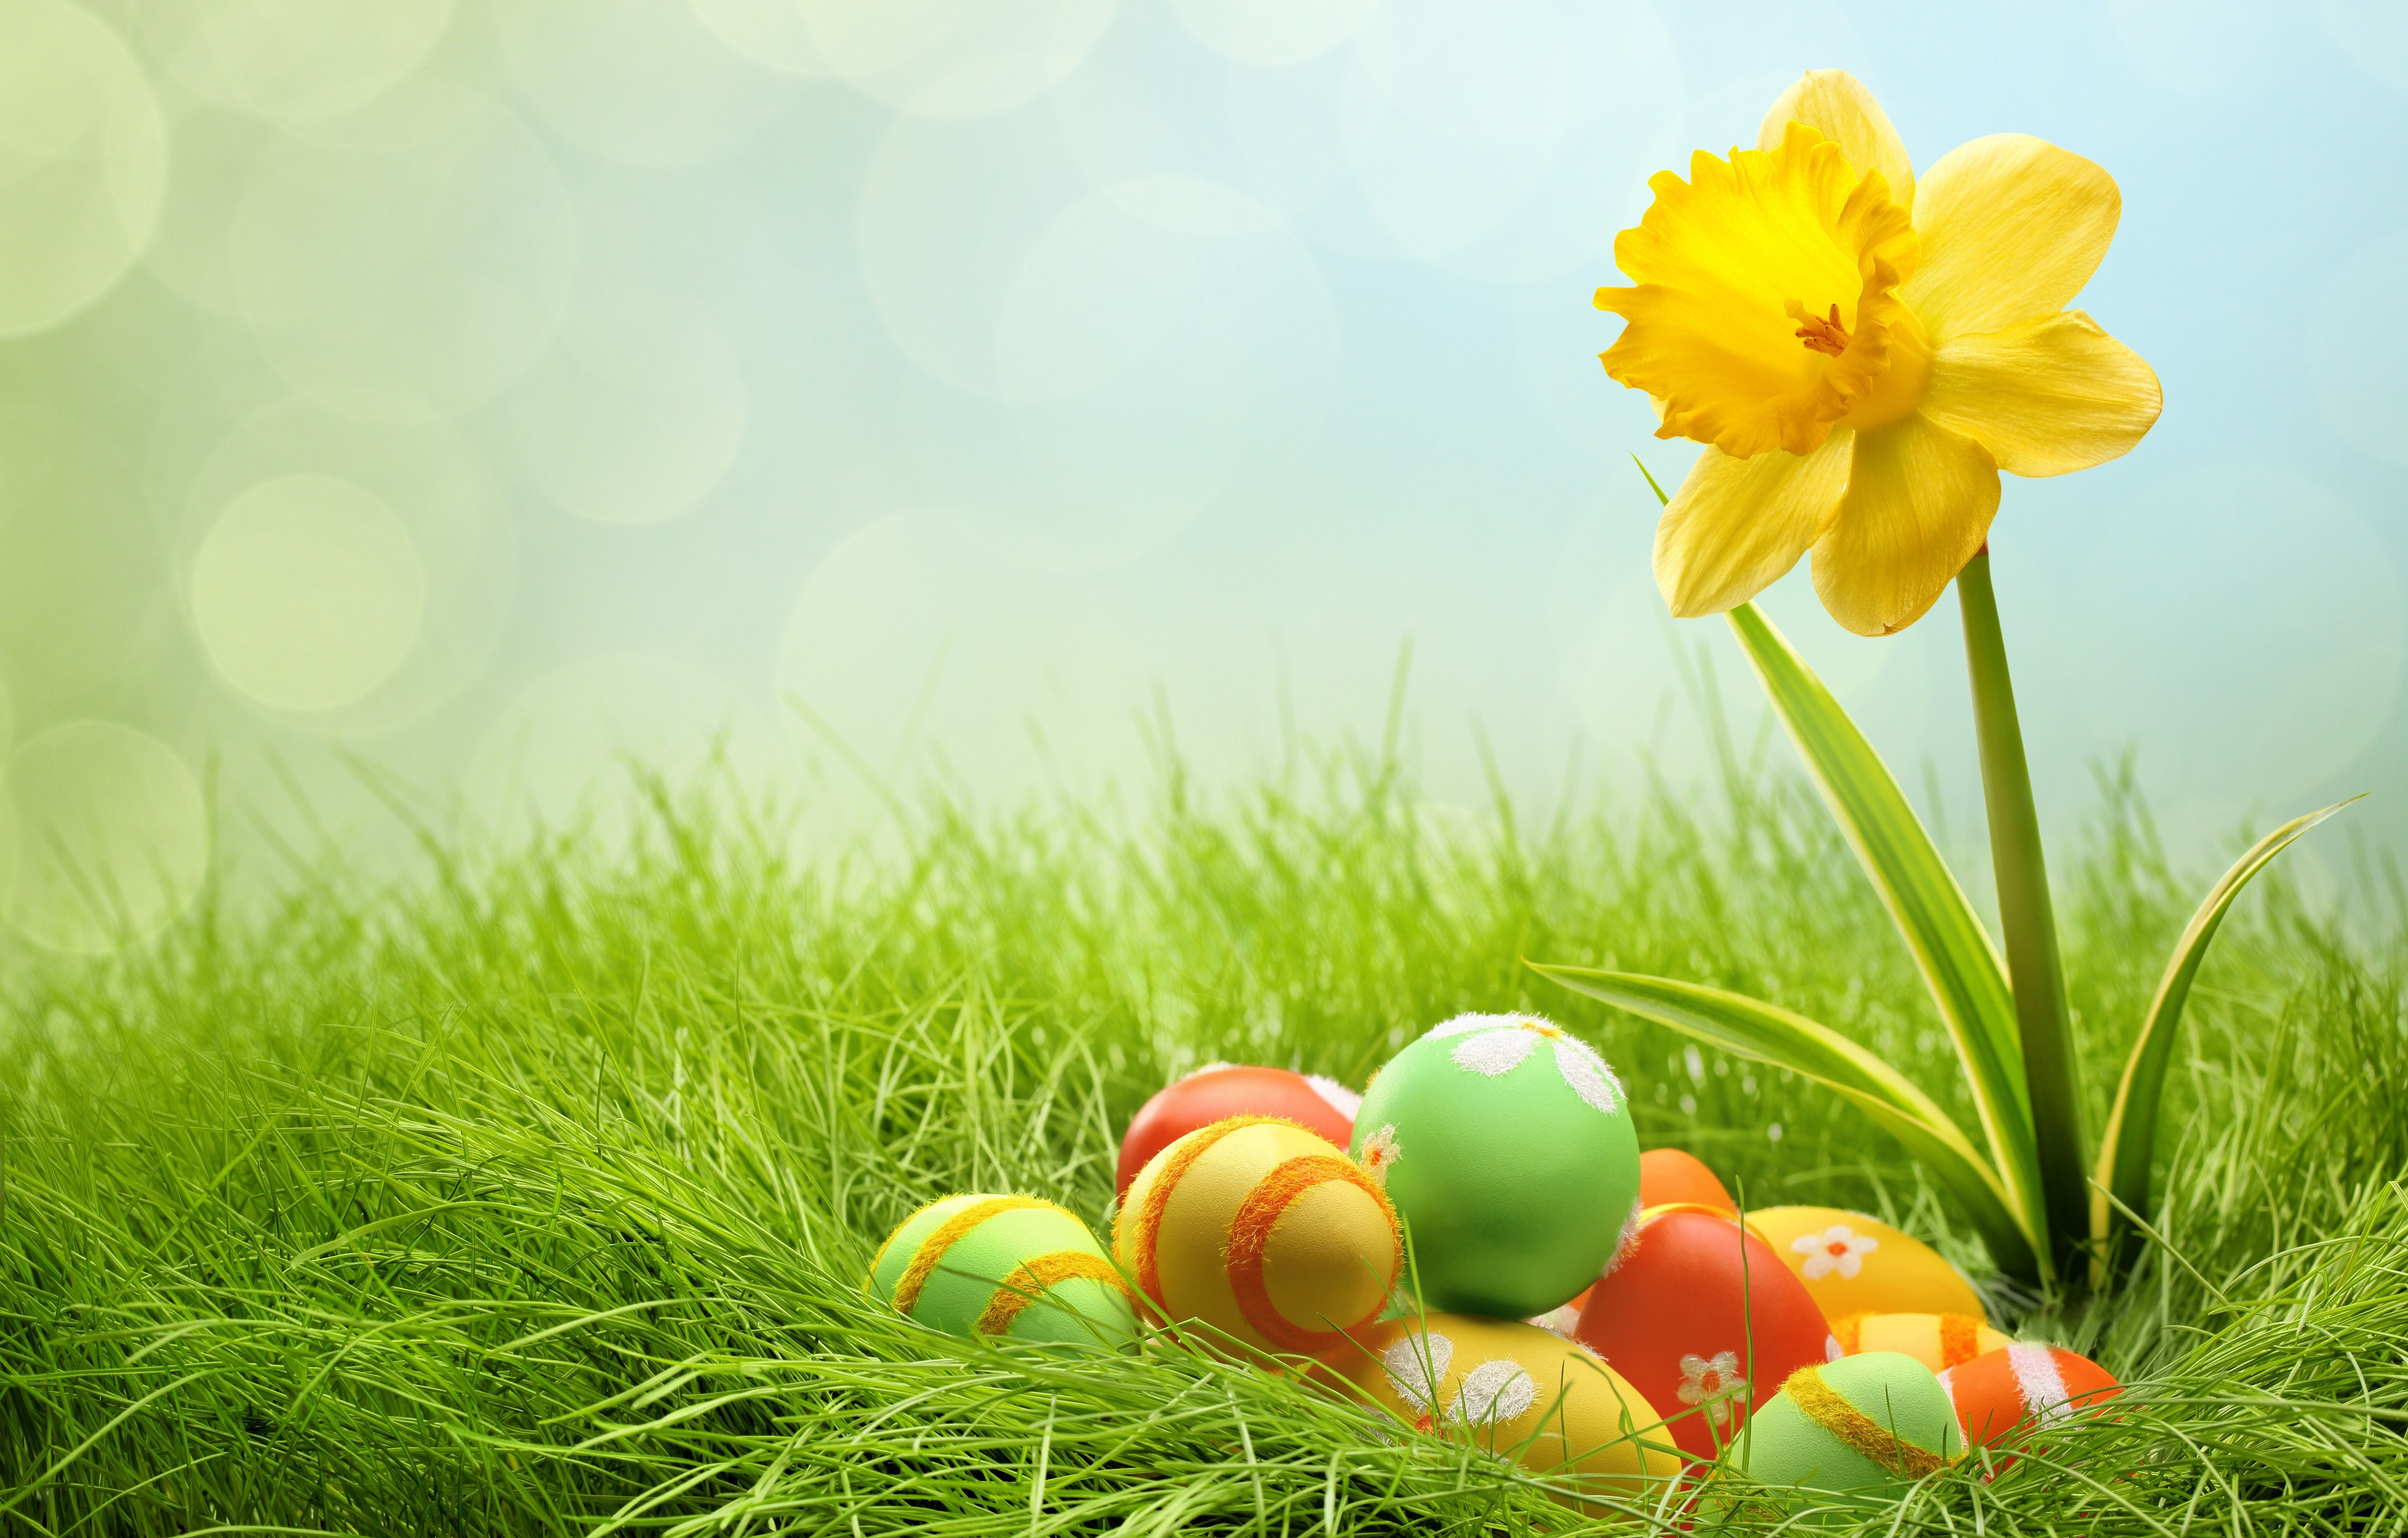 Eggs And Yellow Flower For Easter Wallpaper Image